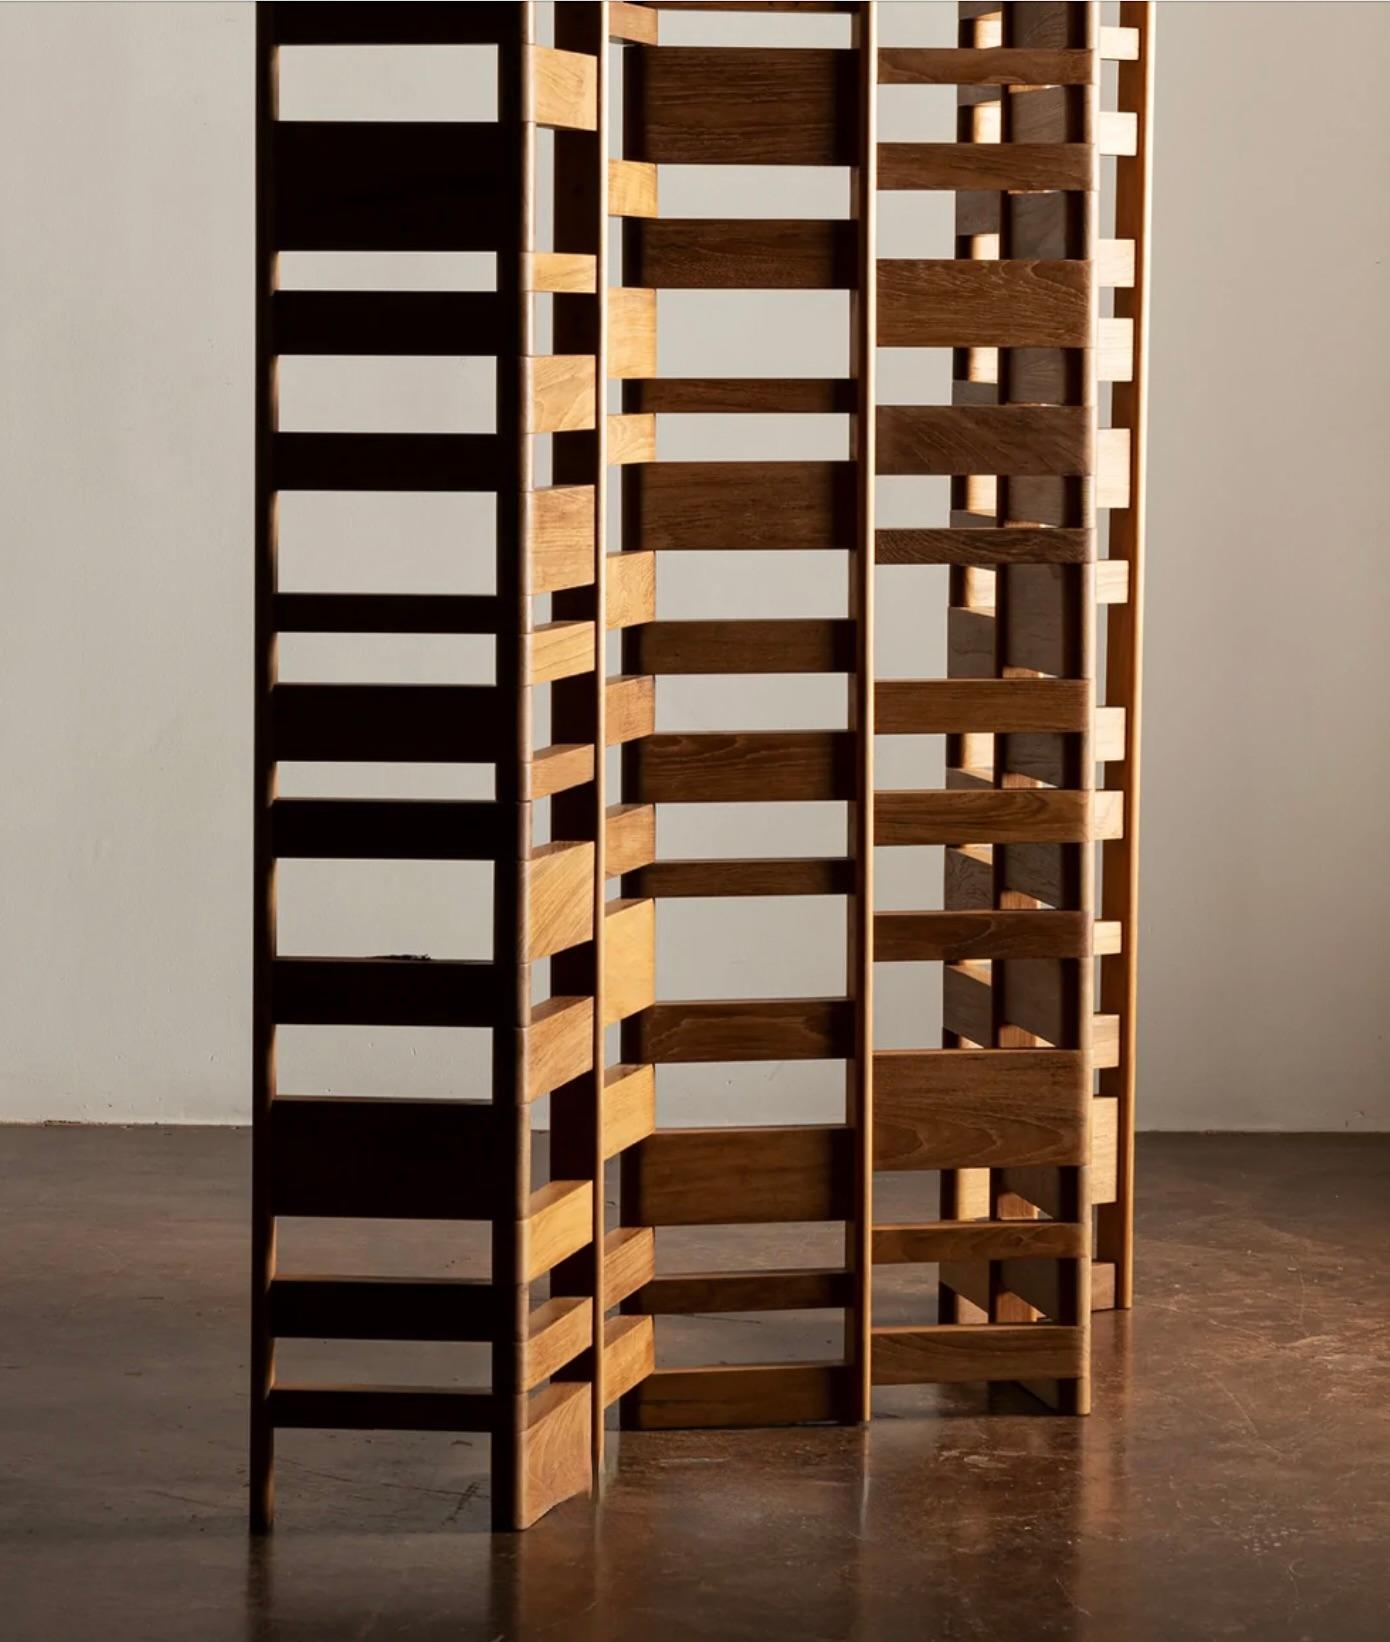 Amsterdam-based design duo Xander Vervoort and Leon van Boxtel designed this folding screen using remnant pieces of teak leftover from the creation of other designs. Handcrafted by traditional craftspeople in Bangalore, India in reclaimed or